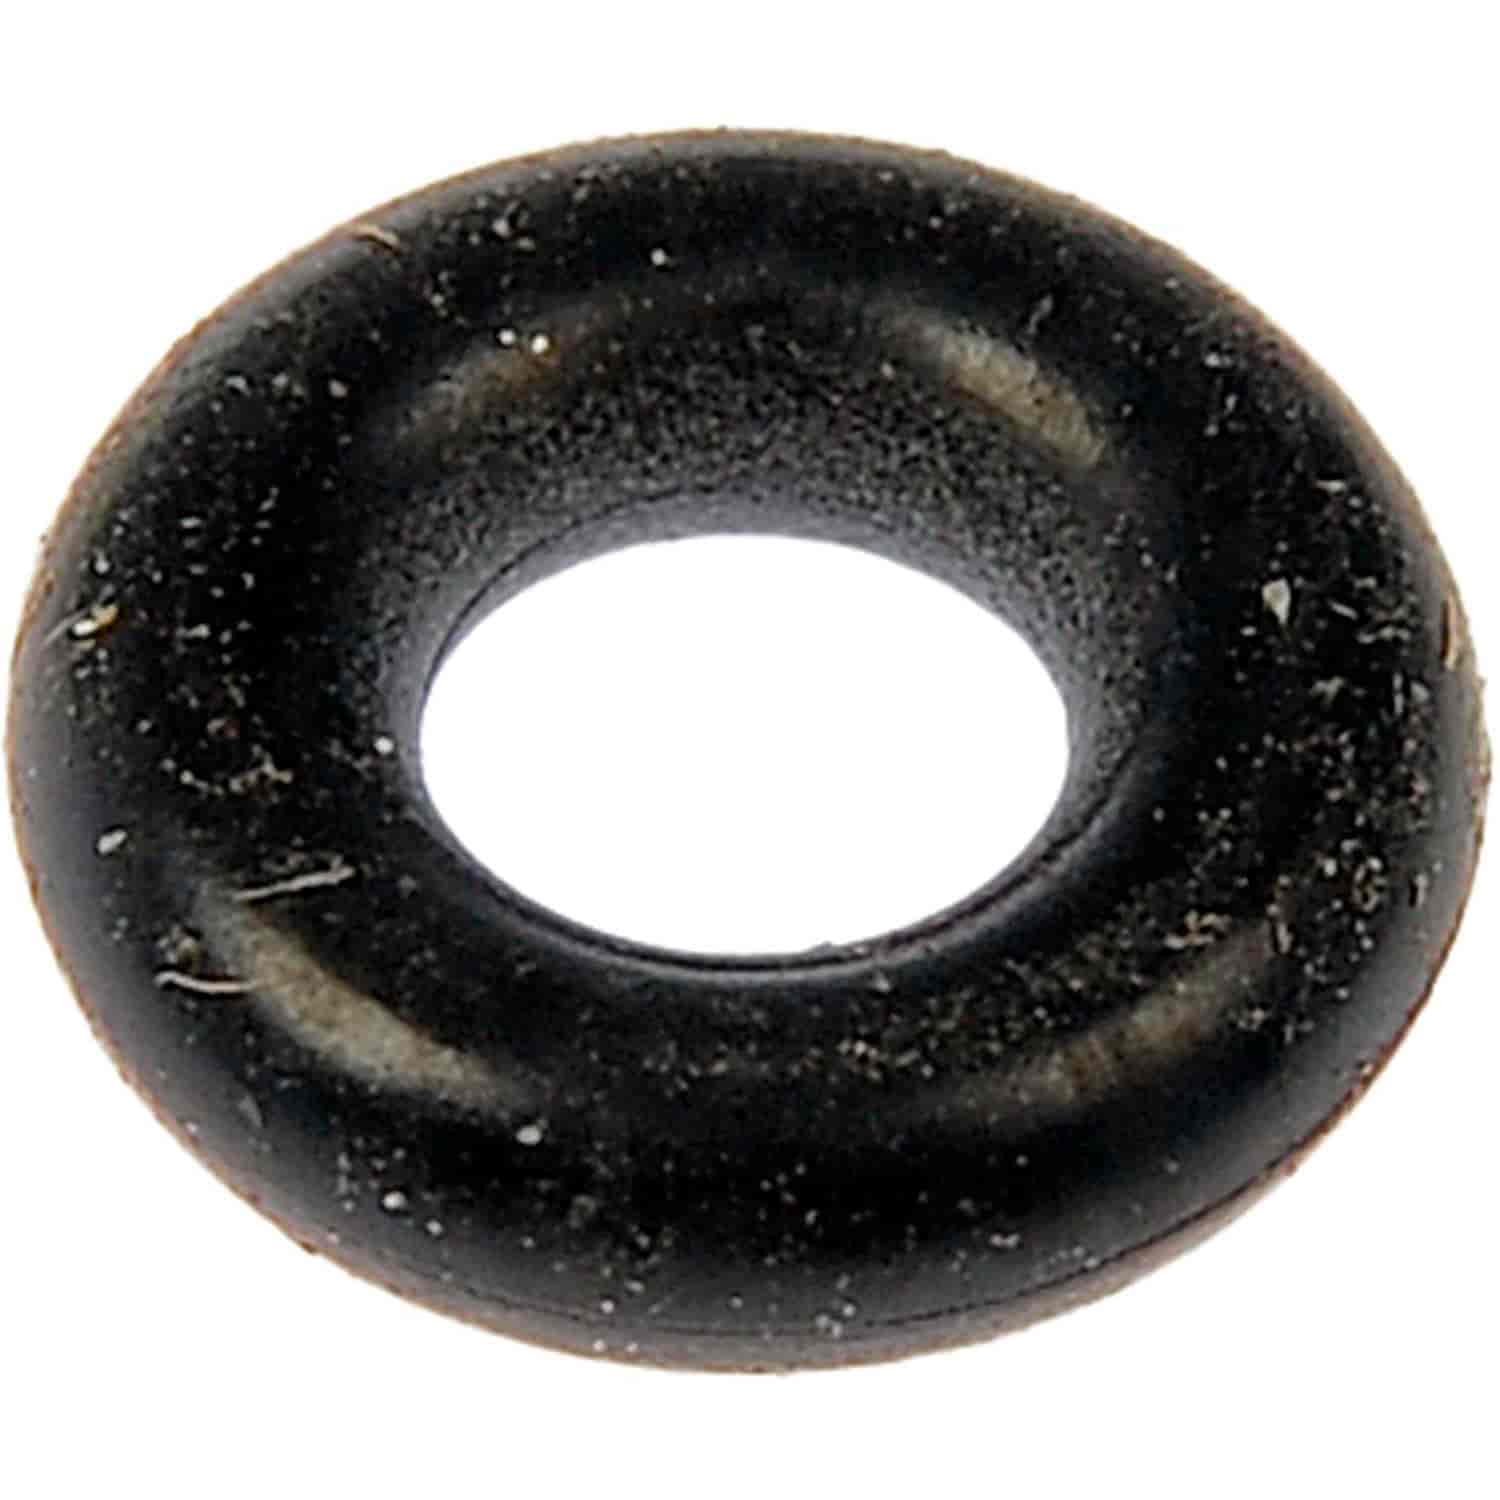 O-RINGS 3MMX7MM